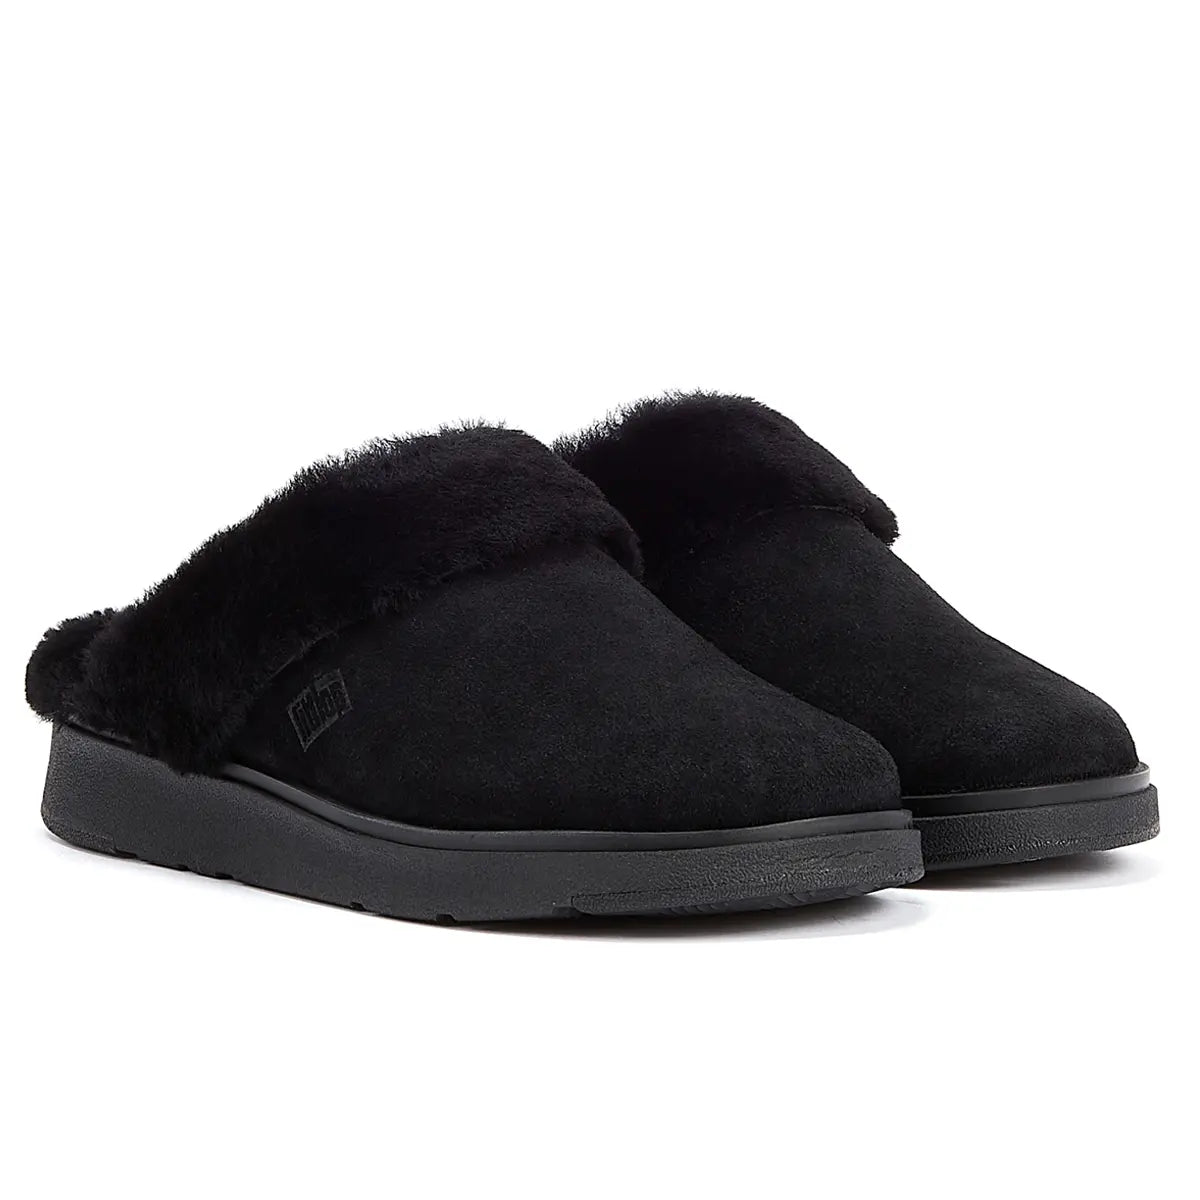 Fitflop Shearling Collar Women’s Black Slippers